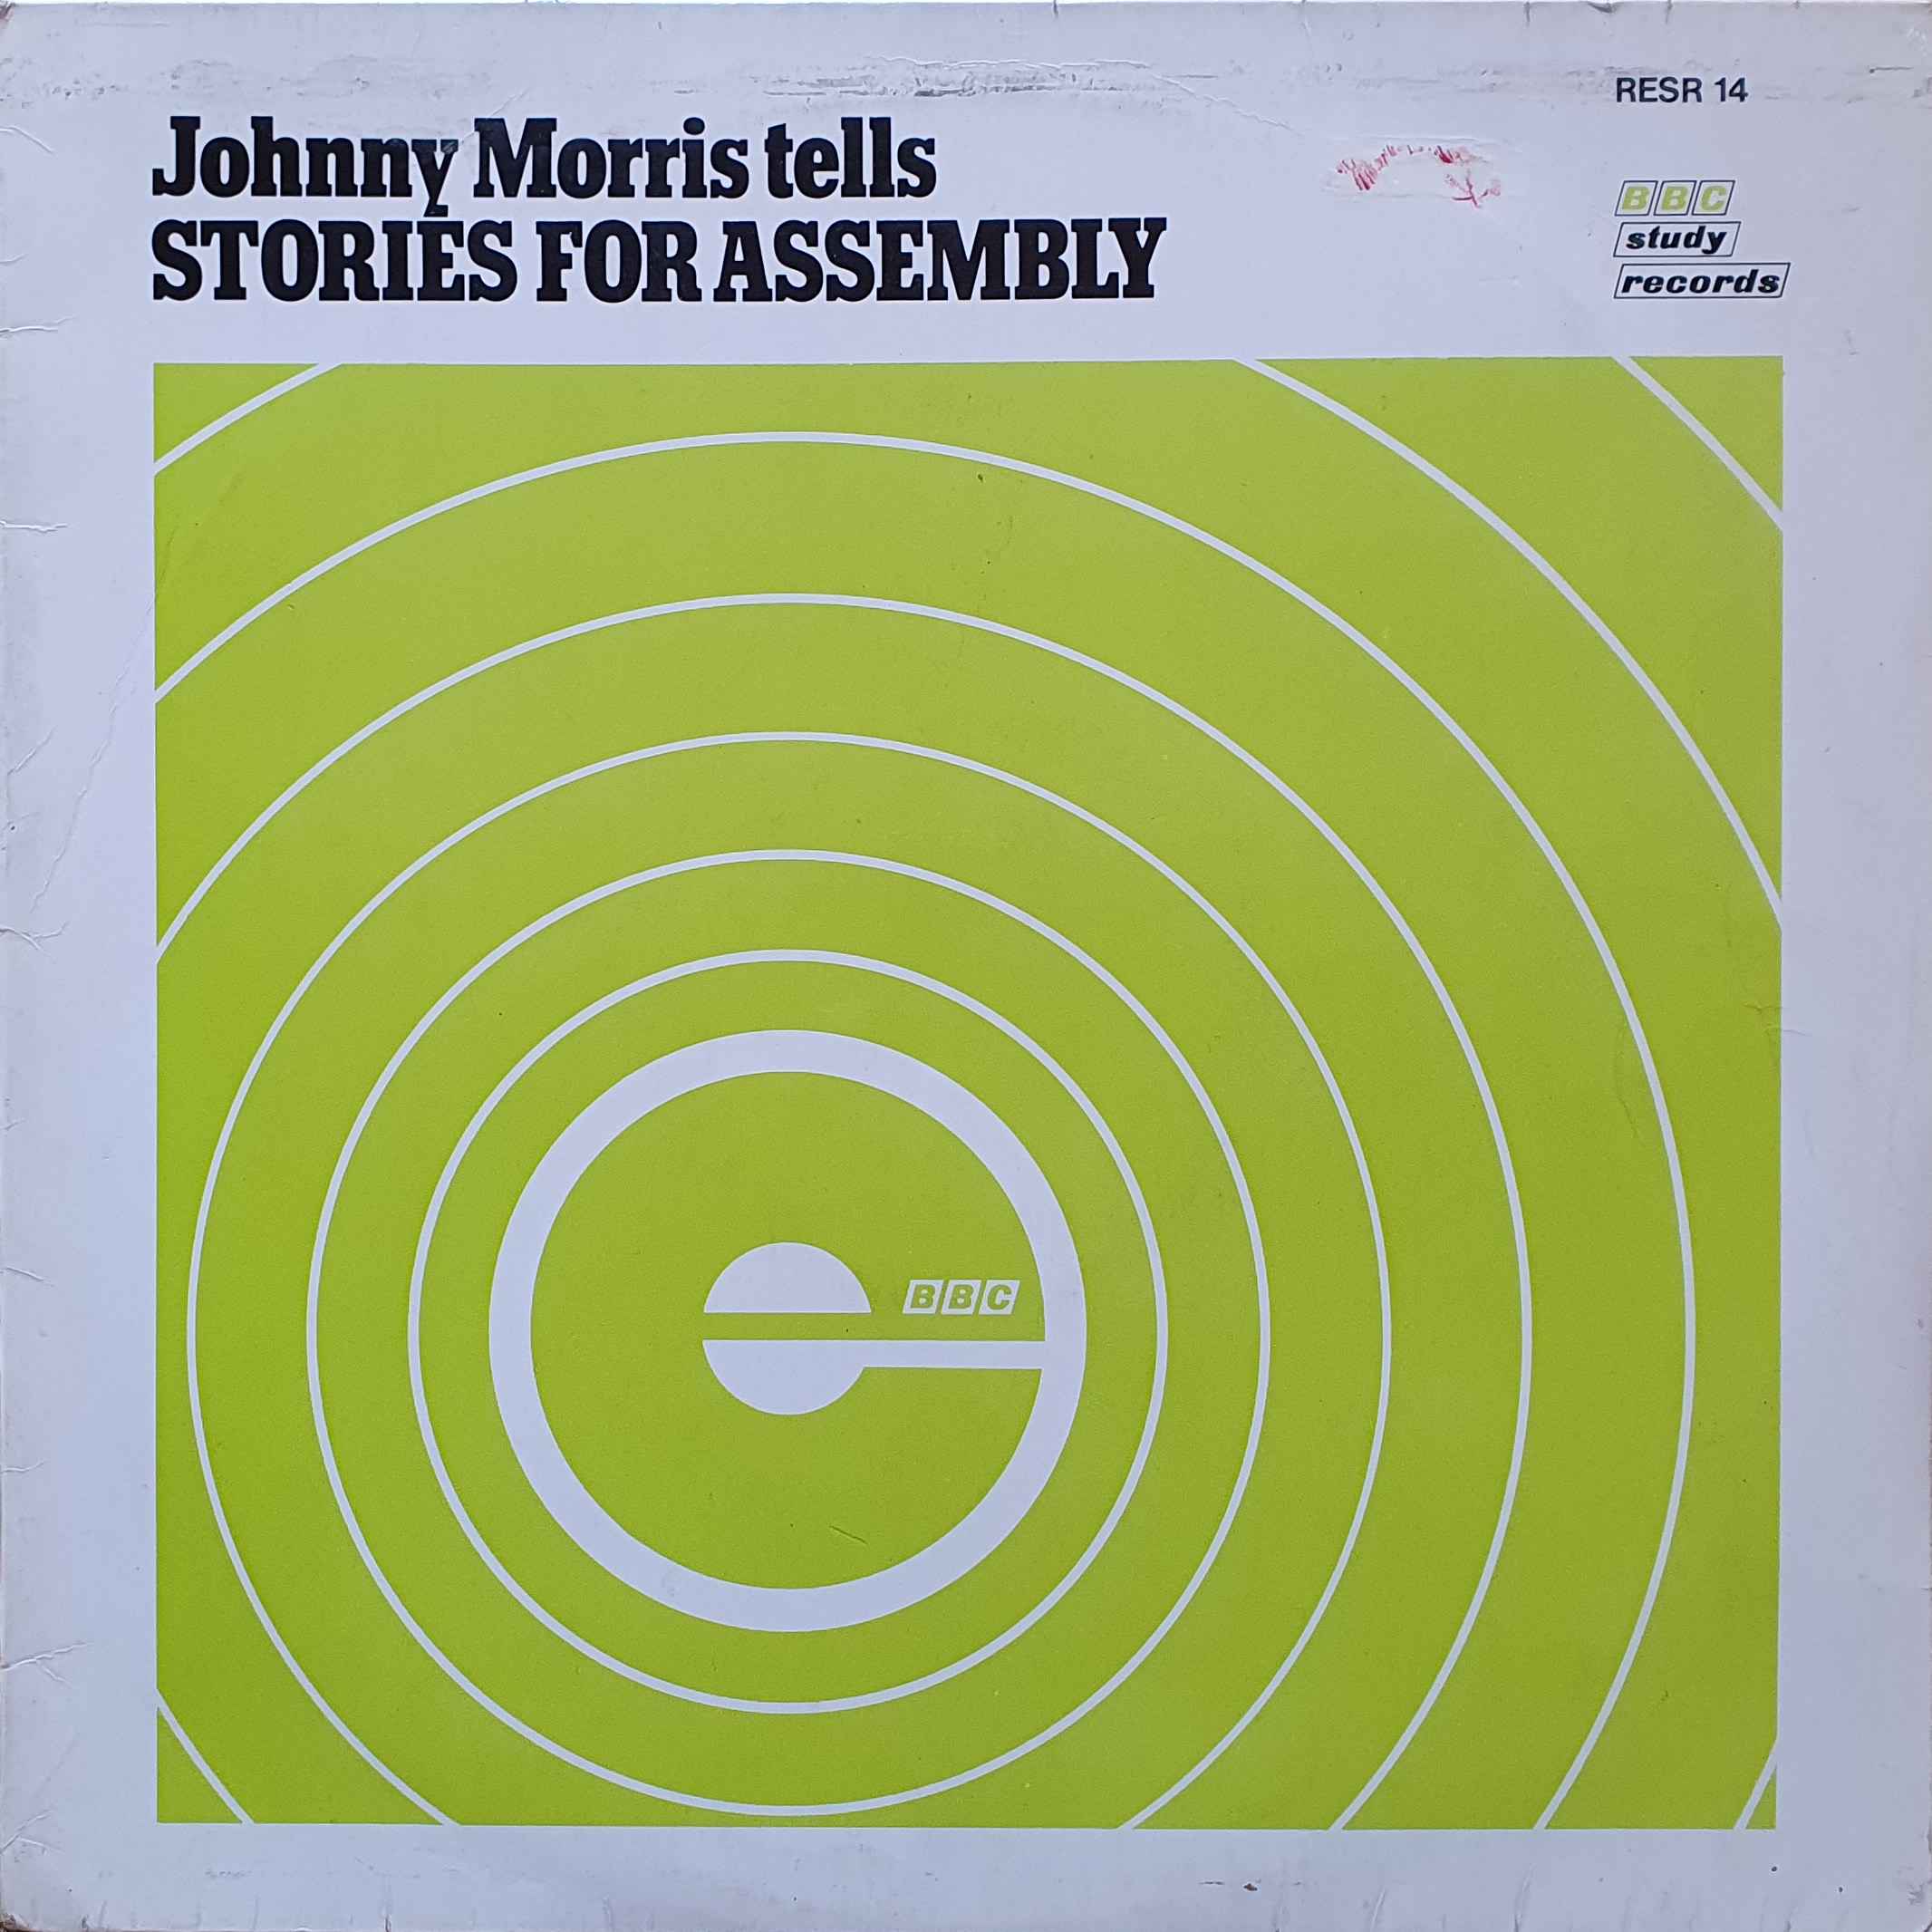 Picture of Stories for assembly by artist Johnny Morris from the BBC albums - Records and Tapes library